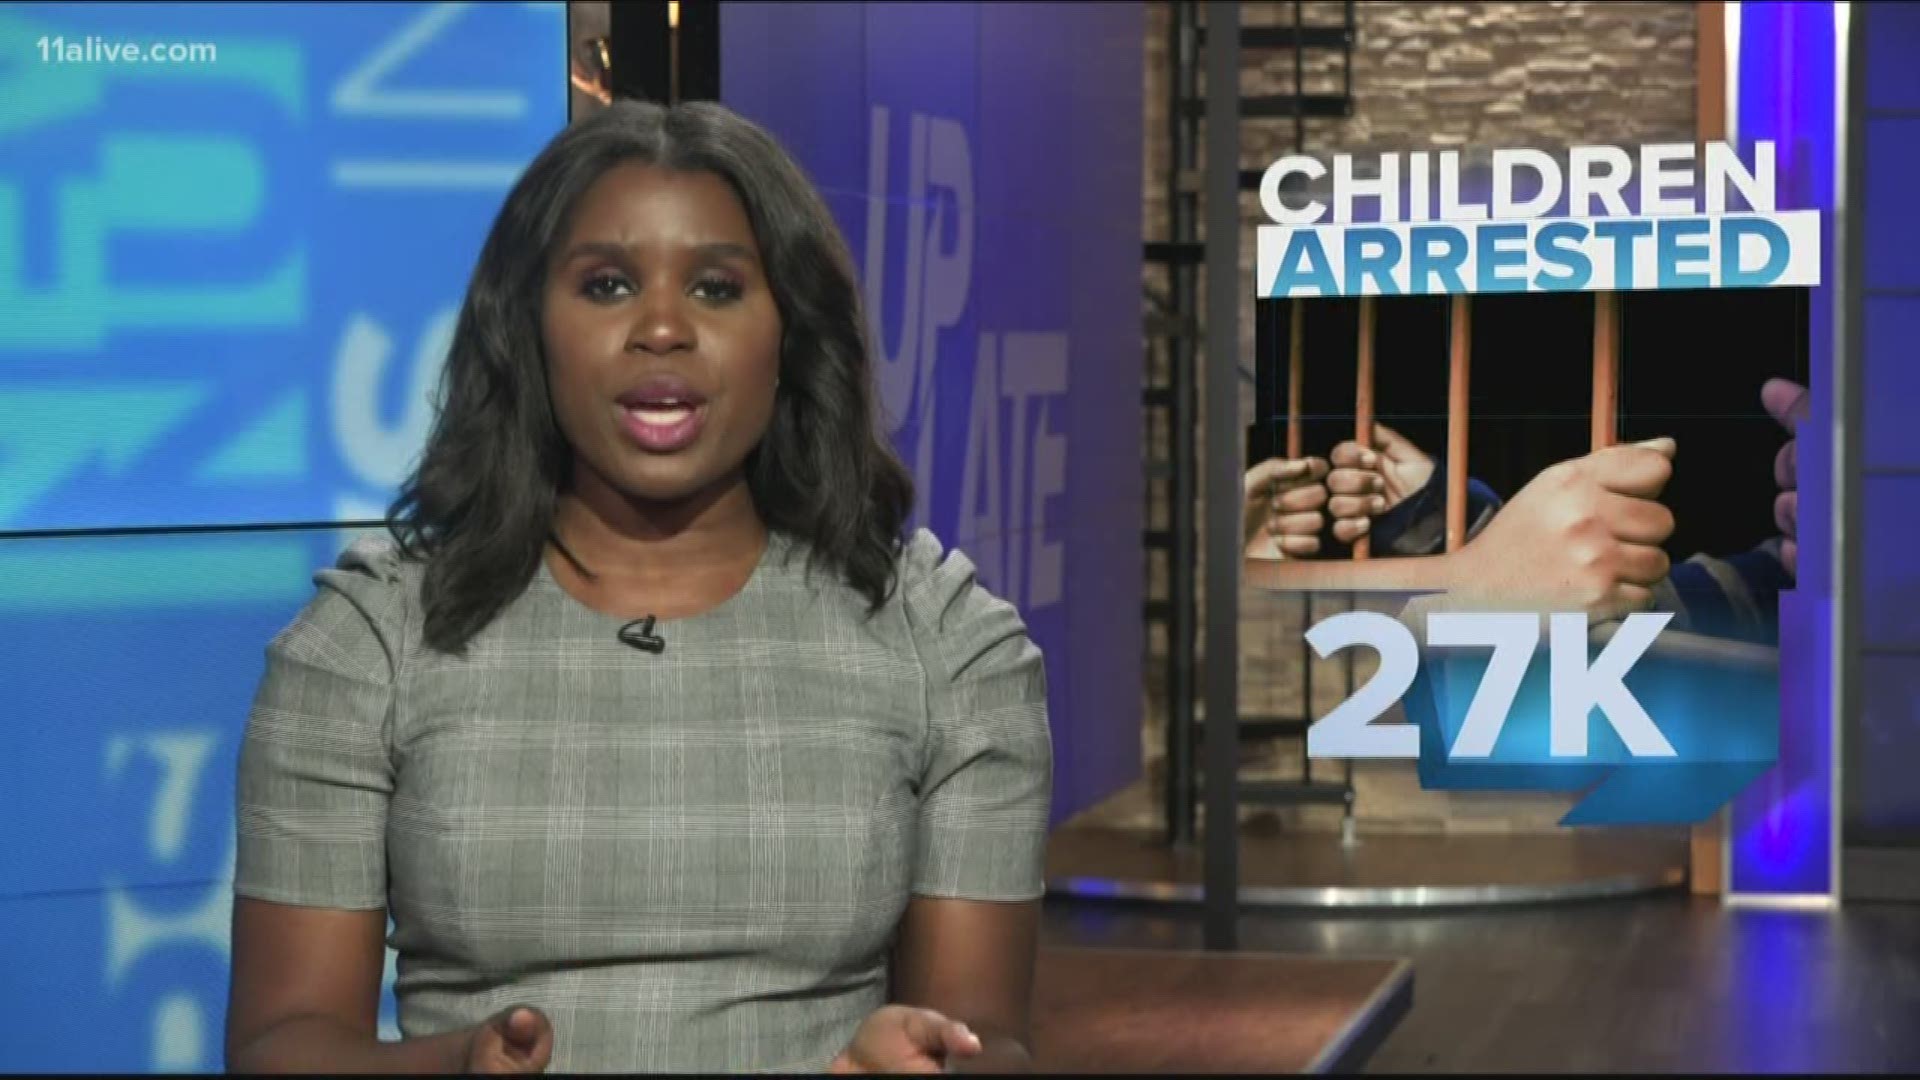 Tv News - Children arrests are not uncommon, Porn plays on highway billboard,  'Stranger Things' gets 4th season: News in Numbers | 11alive.com